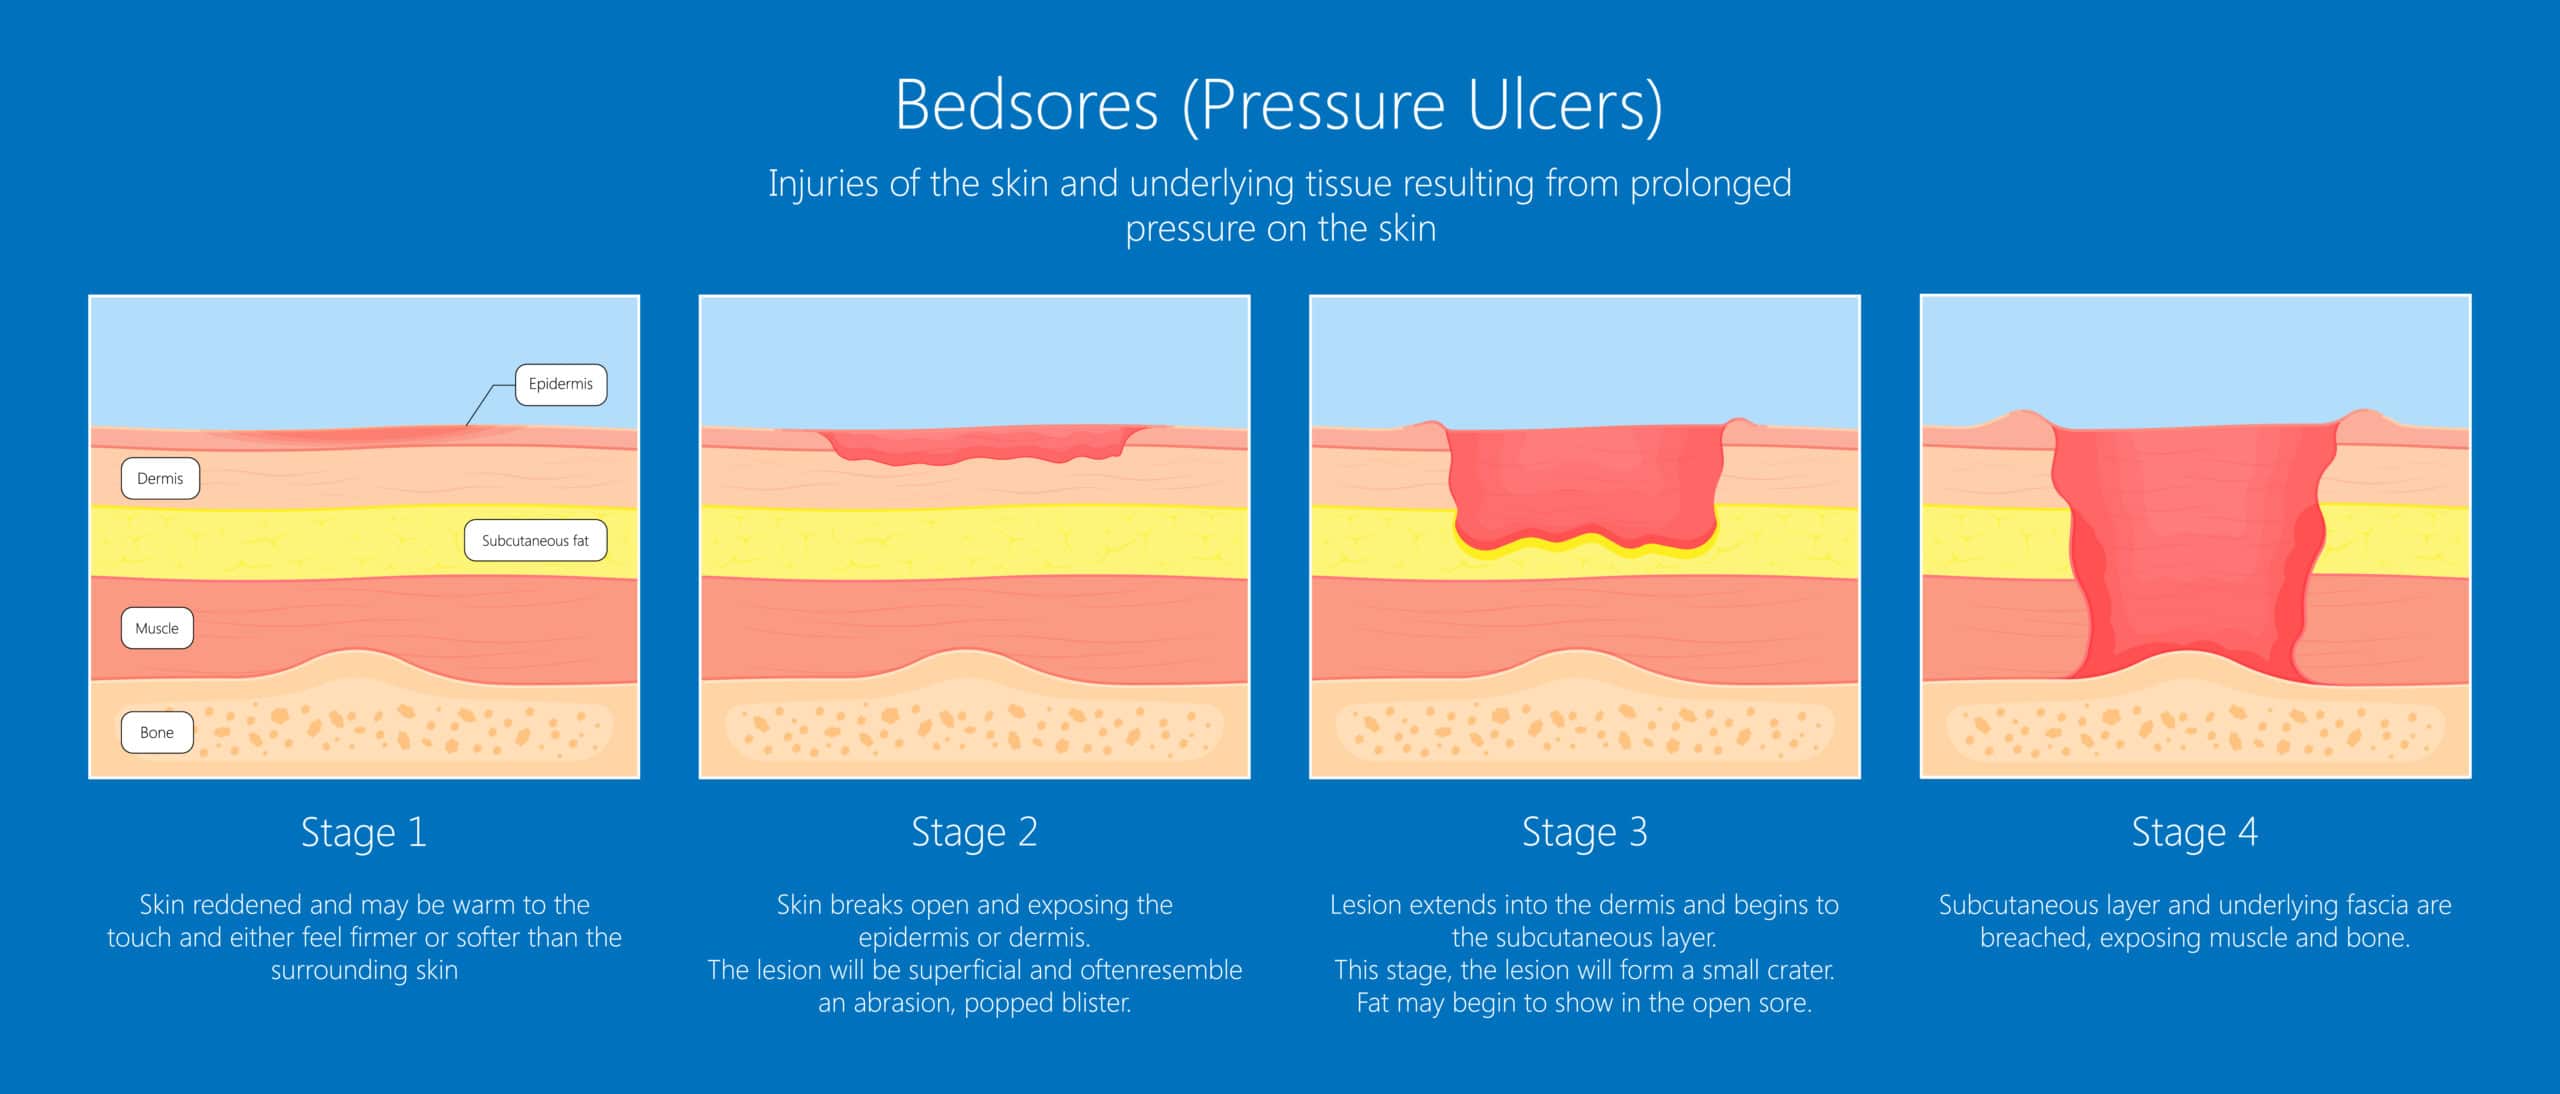 What Are The Different Stages Of Bedsores MedMalFirm